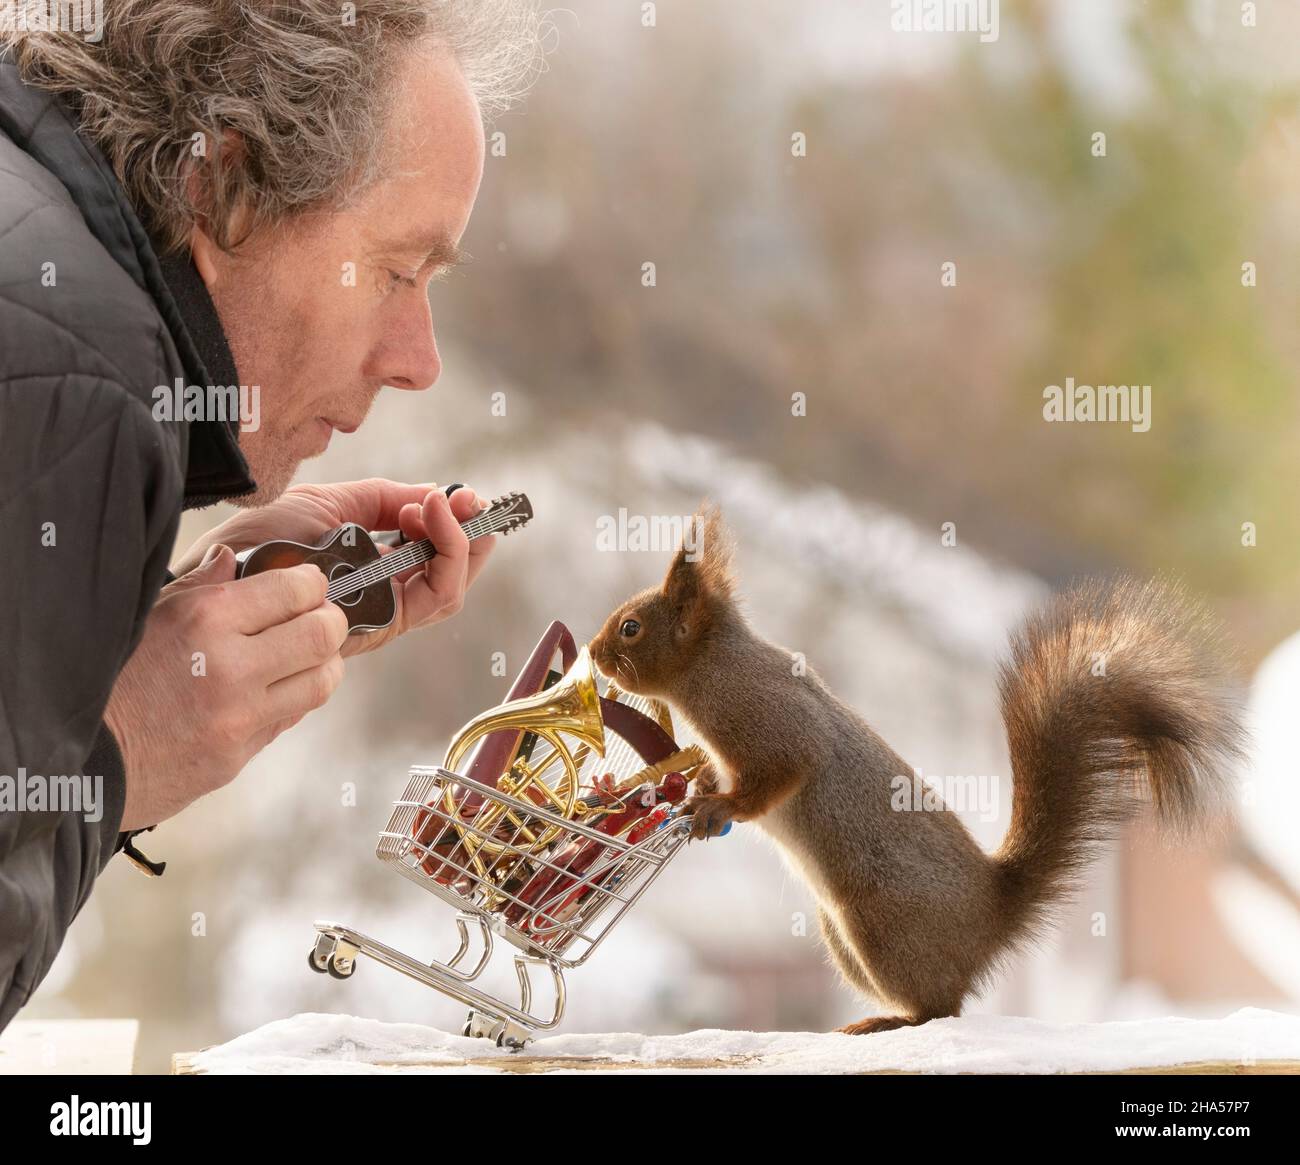 red squirrel is holding a shopping cart with music instruments and man Stock Photo